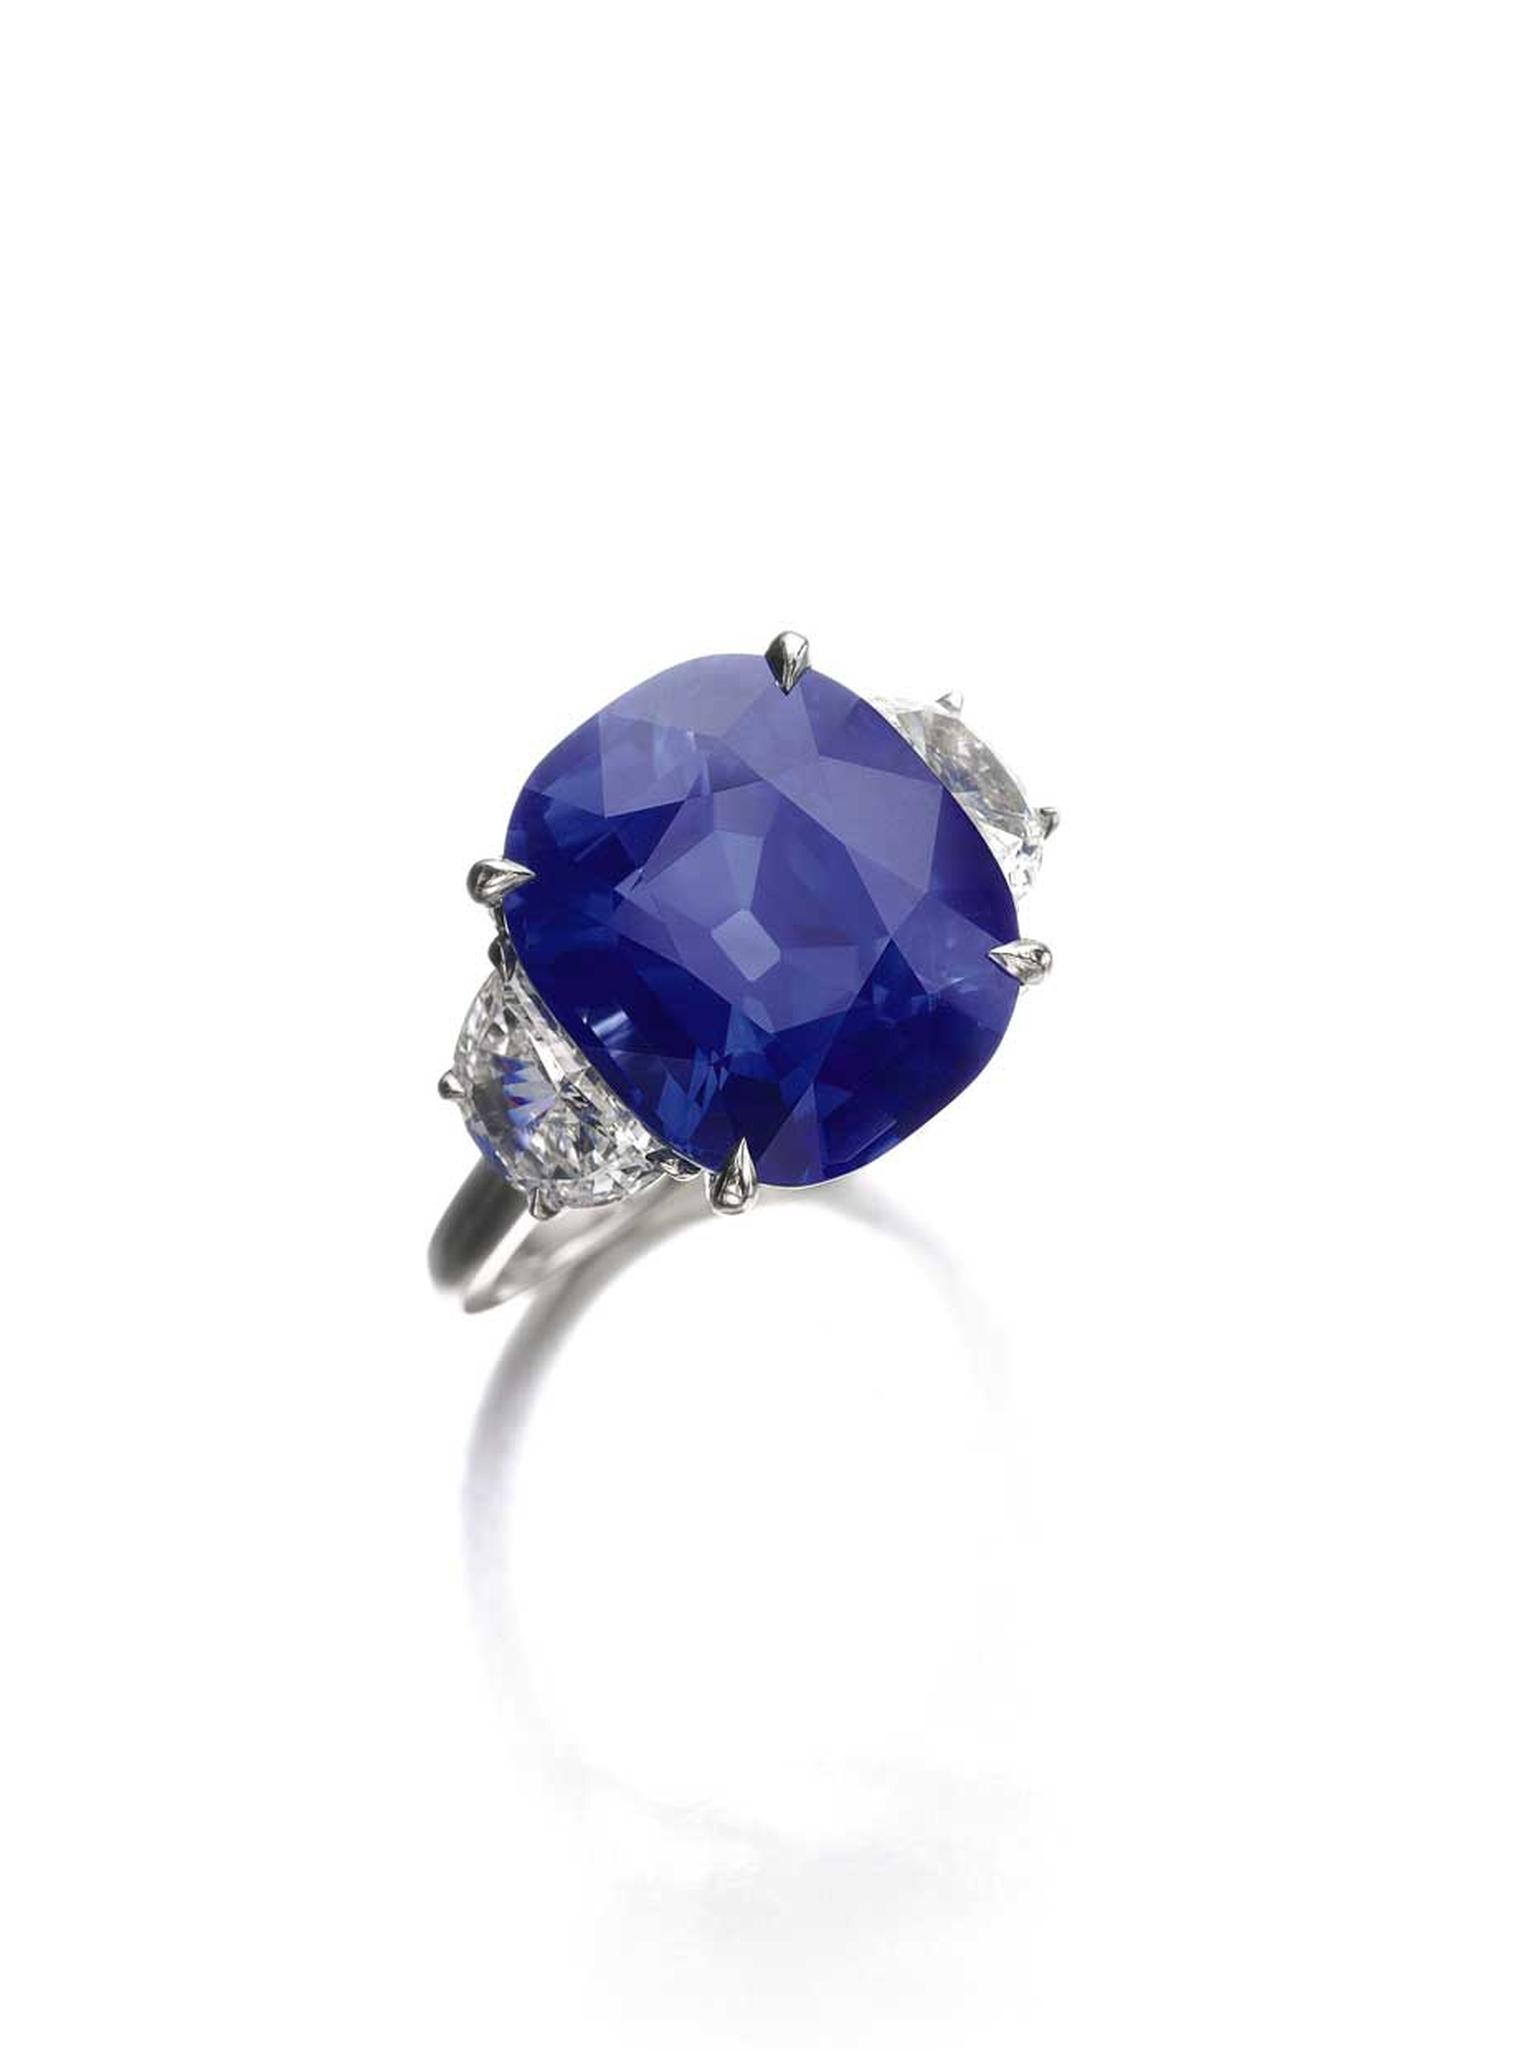 10.96ct cushion-shaped Kashmir sapphire ring between two demi-lune diamond shoulders. Sold for CHF 1,600,000 (estimate: CHF 1,100,000 - 1,400,000)